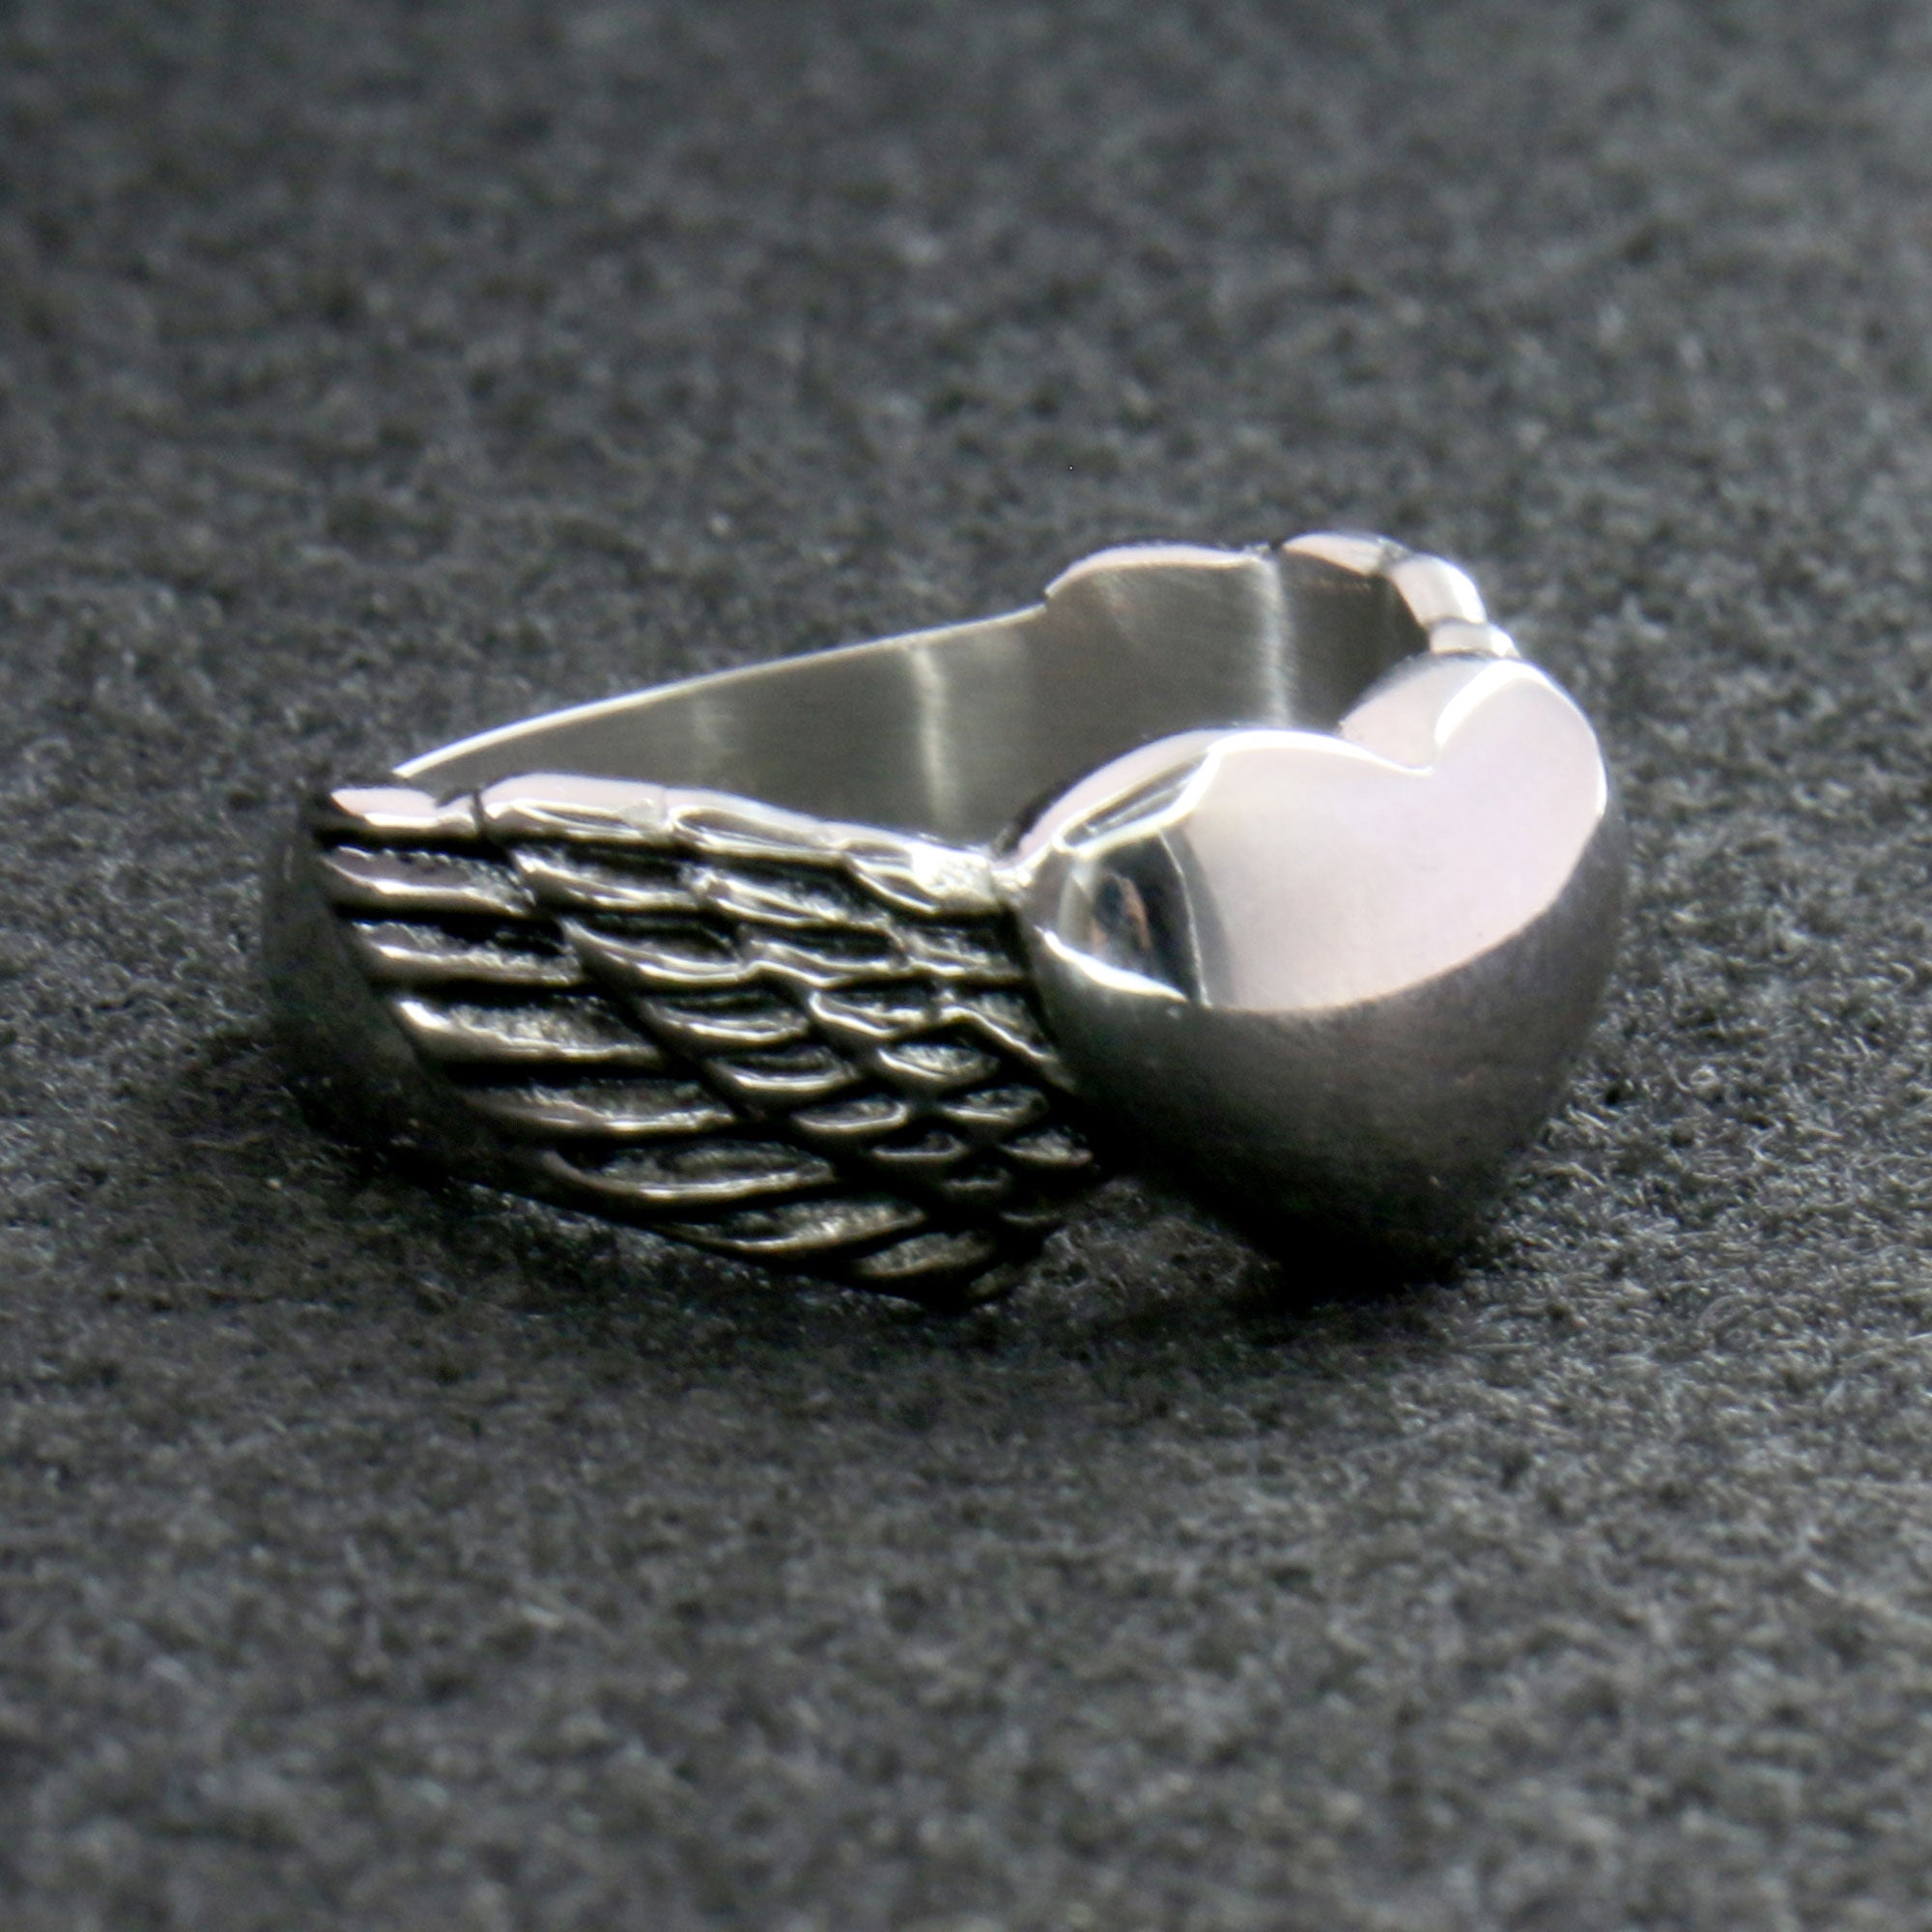 Hot Leathers JWR1101 Women's Silver 'Winged Heart' Stainless-Steel Ring